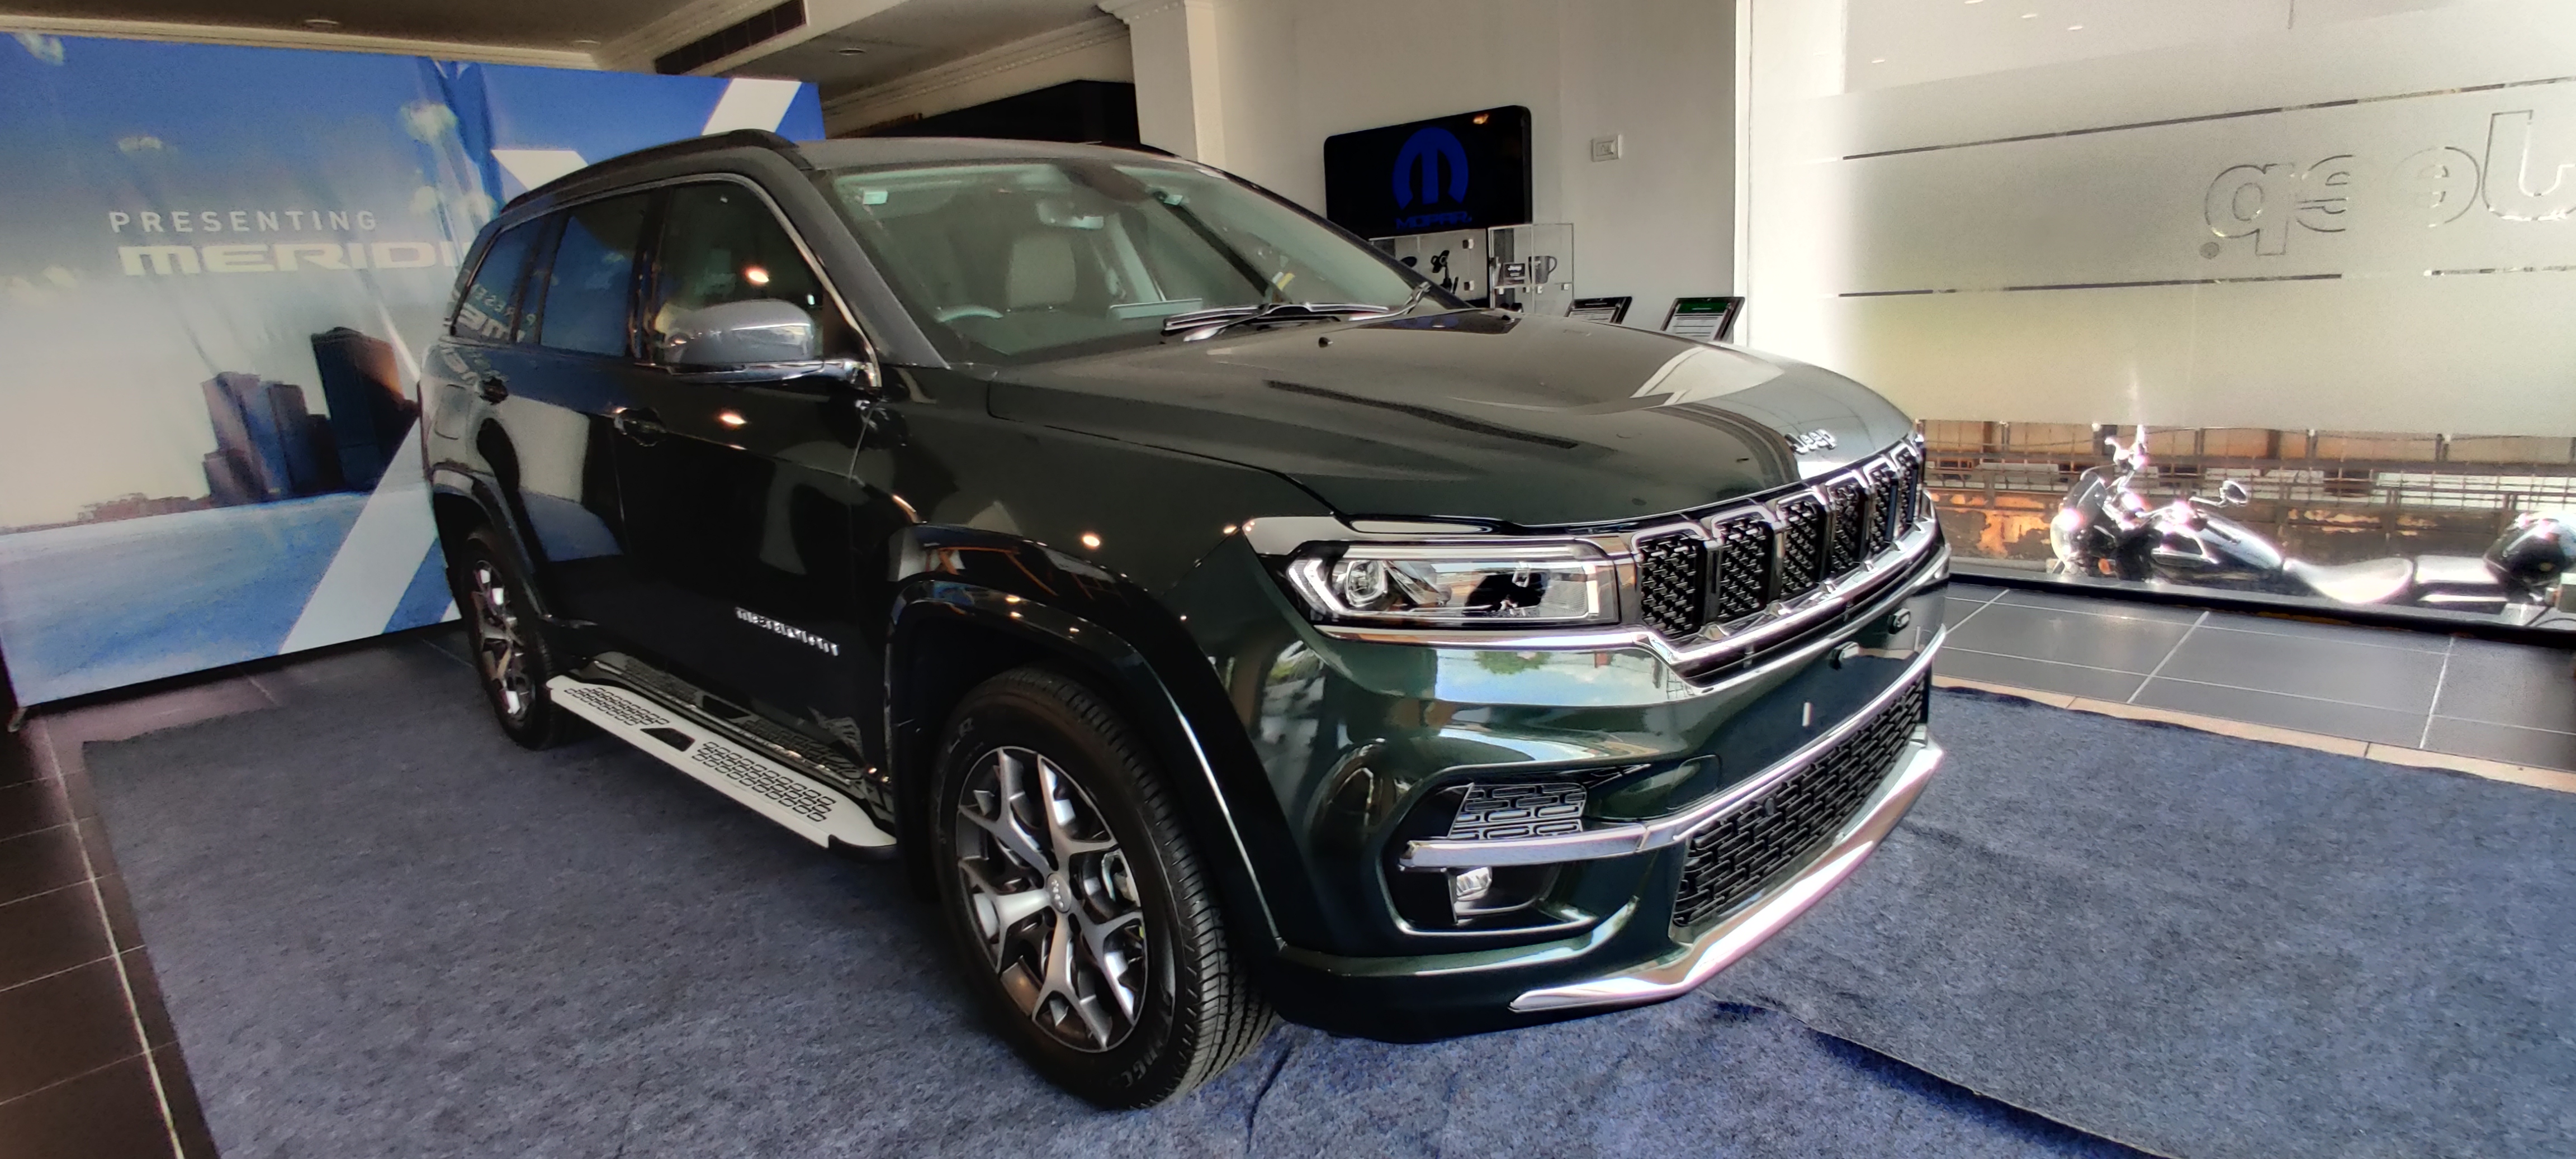 Jeep® India launches two exciting Special Editions: Meridian Upland and Meridian X for Adventure and Sophistication